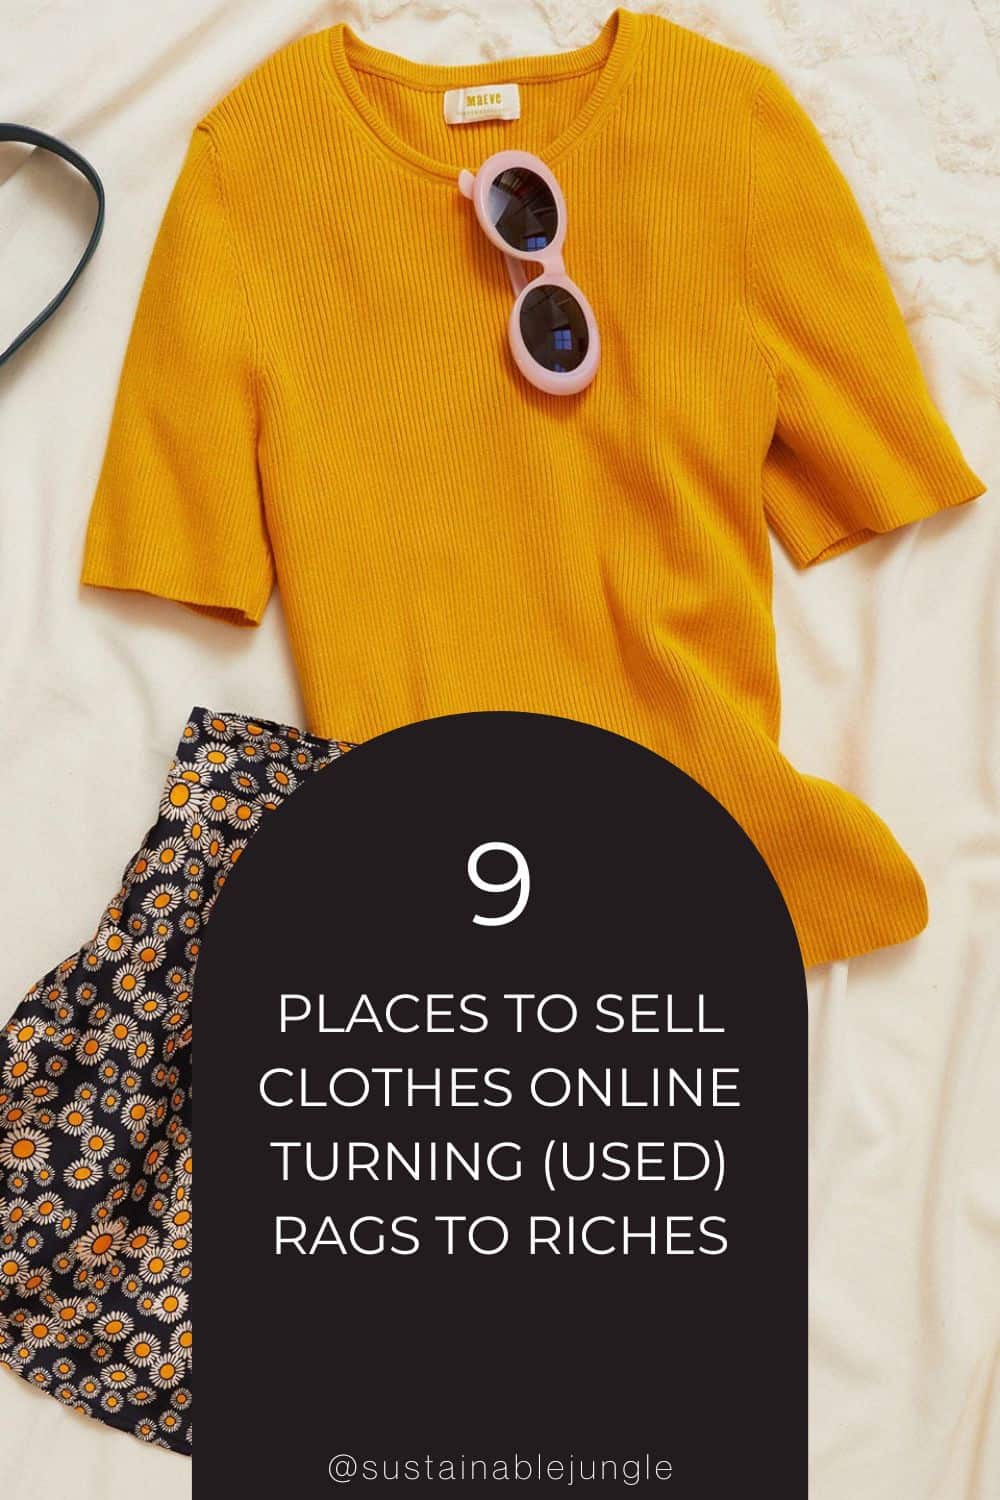 9 Places To Sell Clothes Online Turning (Used) Rags To Riches Image by thredUP #sellusedclothesonline #sellingusedclothes #sellclothesonline #sellingclothesonline #wheretosellclothesonline #bestplacestosellclothesonline #sustainablejungle